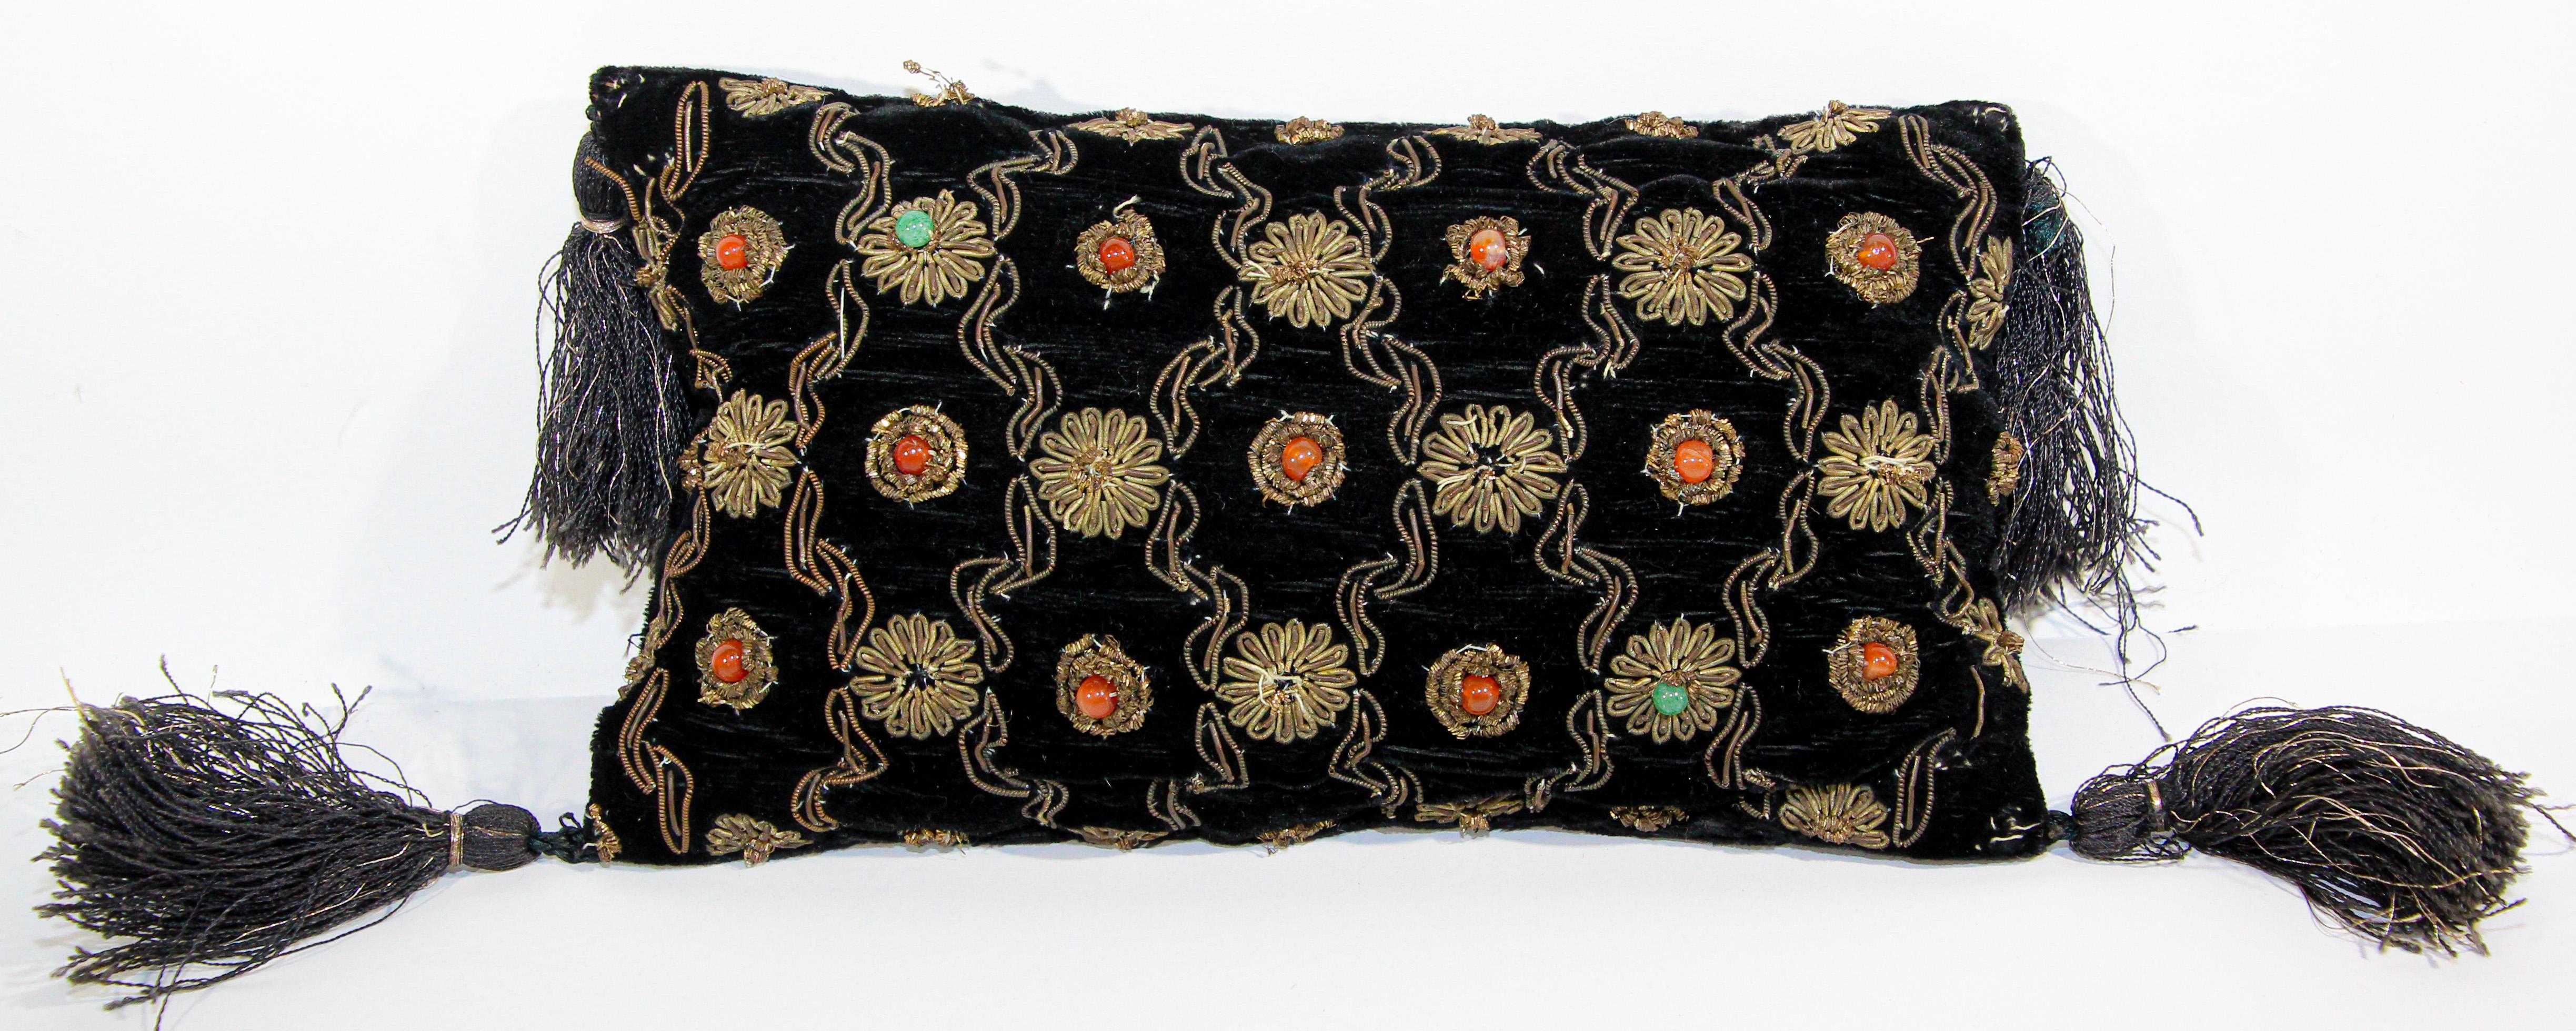 Black Velvet 1960s Zardozi Zari Gemstone Pillow, India.
Beautiful 1960s Zardozi Zari gem-set black velvet embroidered with metallic gold threads and decorated with coral and turquoise stones.
Handcrafted very small pillow with tassels.
Measures: